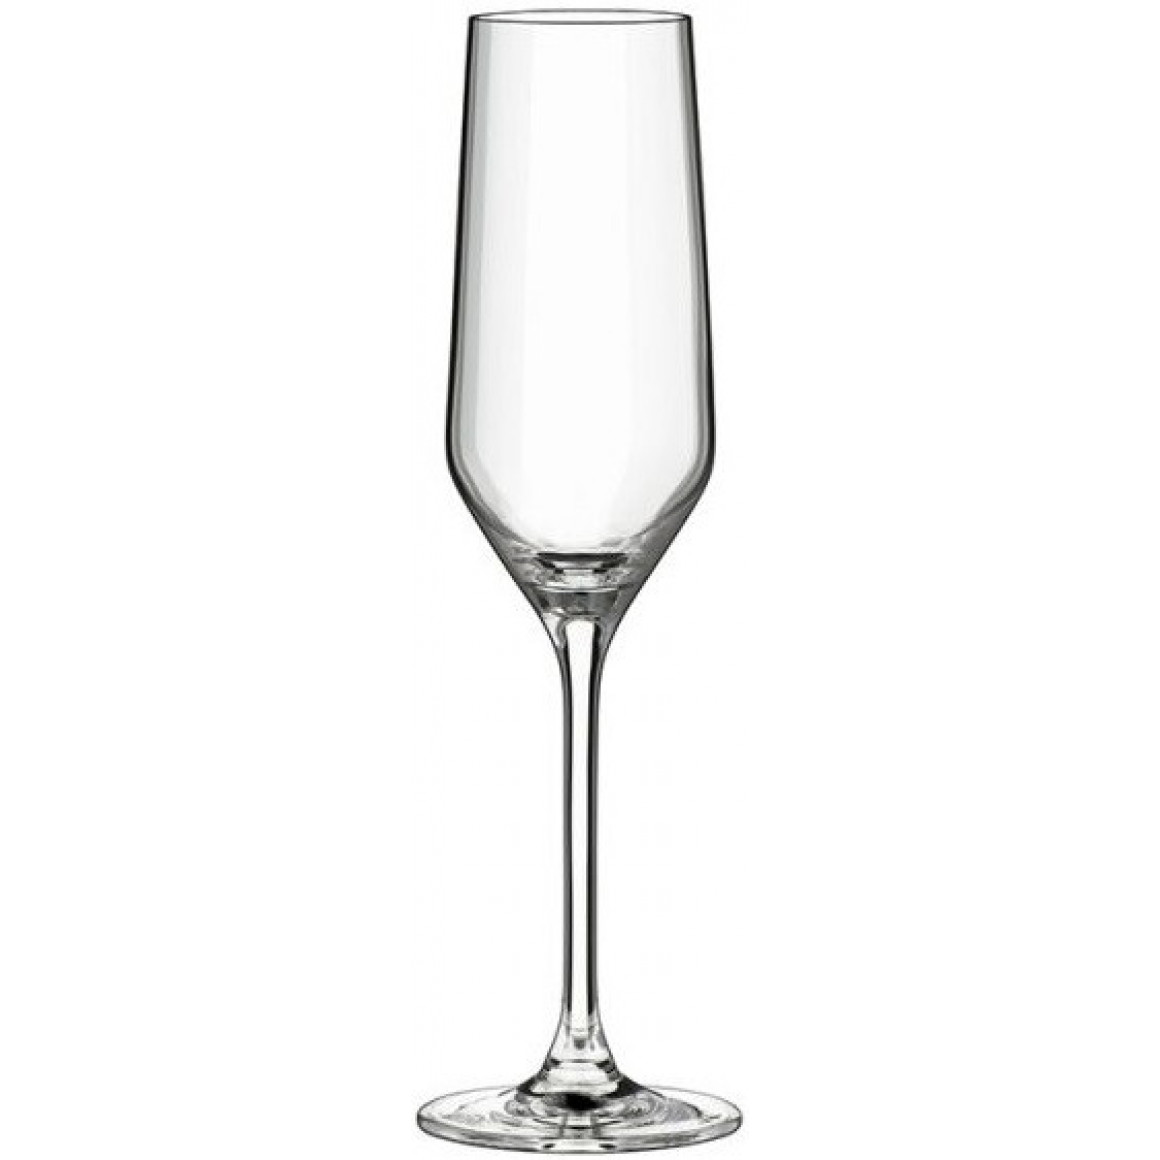 Champagne flute Image 22cl